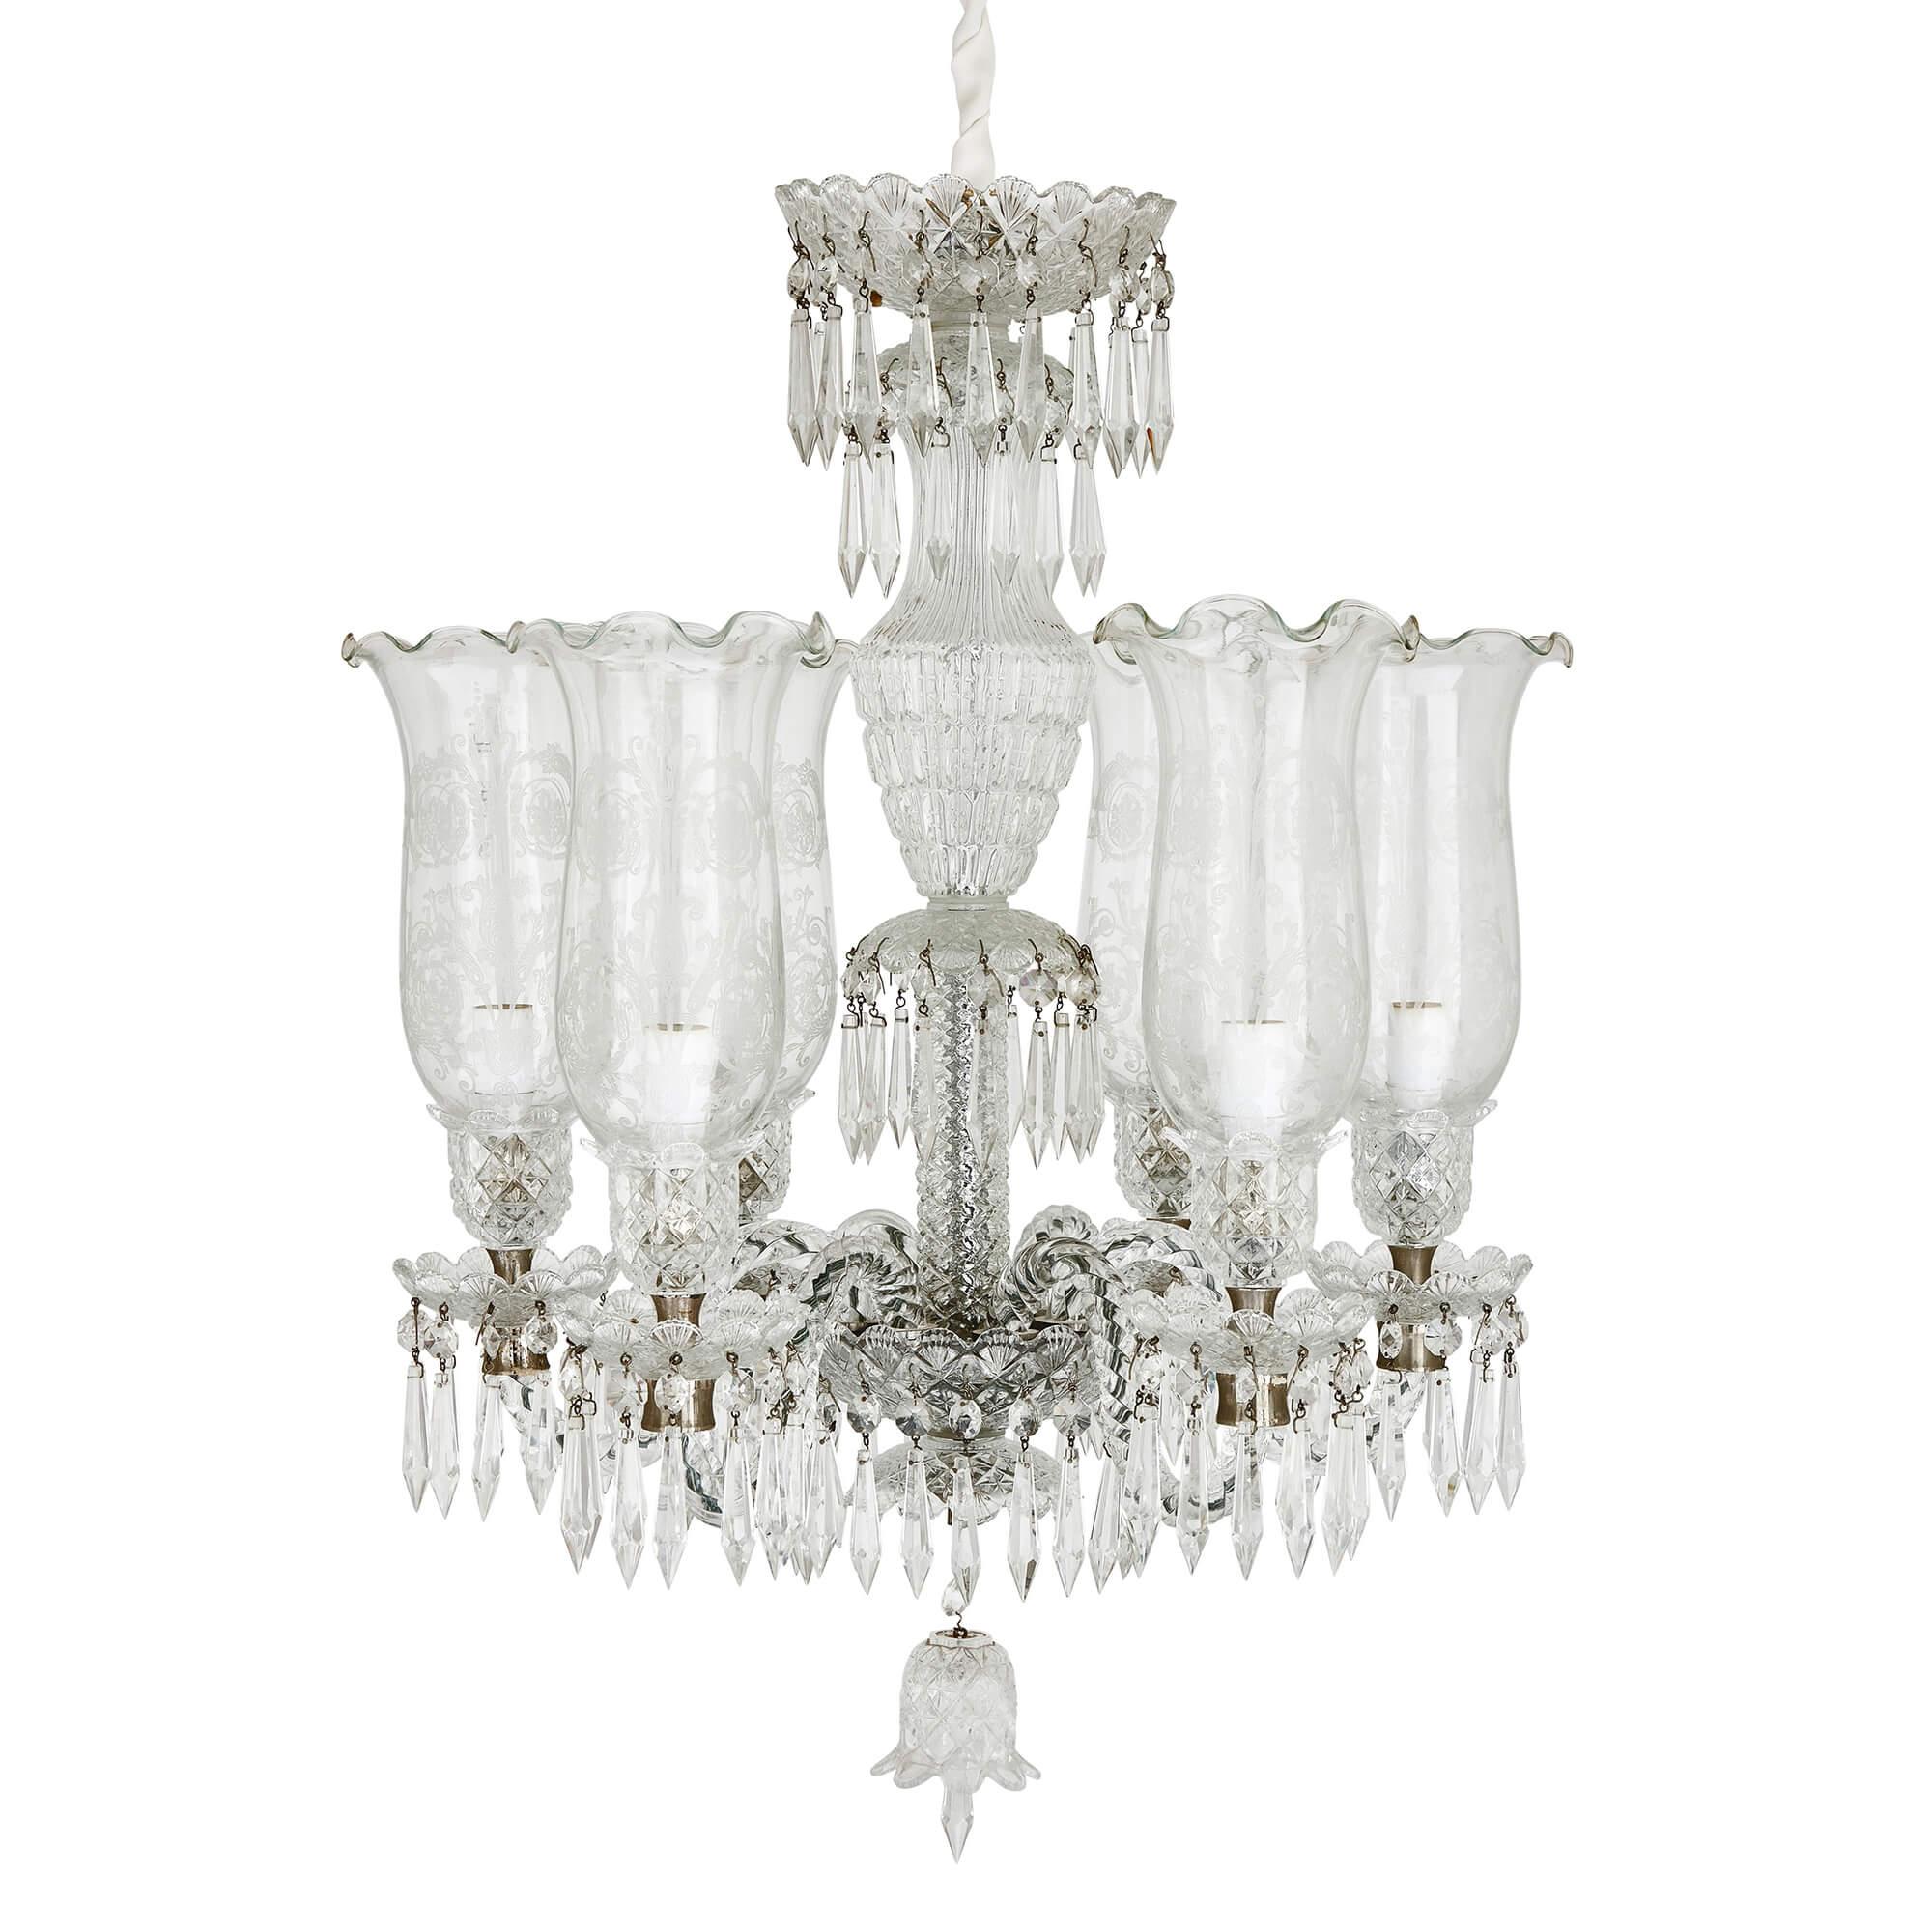 Pair of clear cut and etched glass 6-light chandeliers
Continental, 20th Century 
Height 68cm, diameter 51cm

Expertly crafted from cut and etched glass, the chandelier’s design showcases opulence and luxury, motifs popular during the French Belle